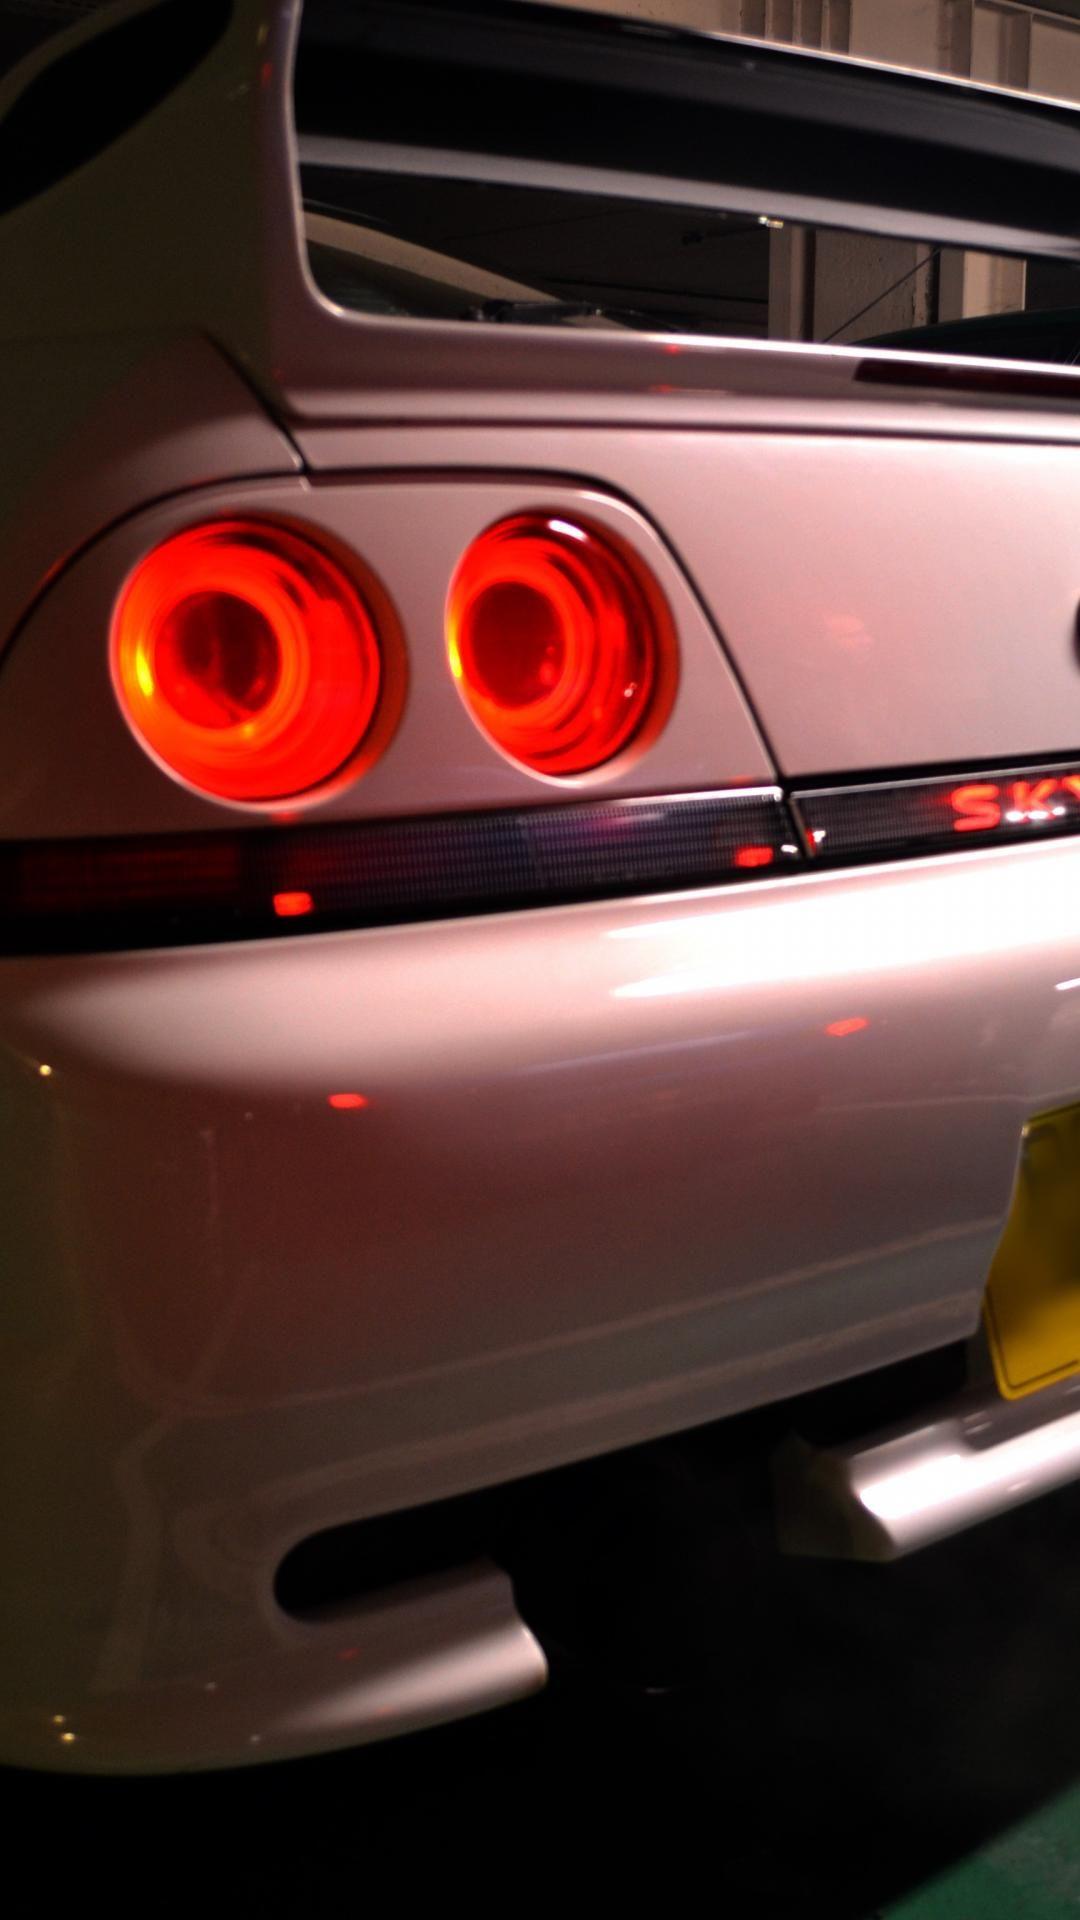 R33 Skyline Iphone Wallpapers Top Free R33 Skyline Iphone Backgrounds Wallpaperaccess